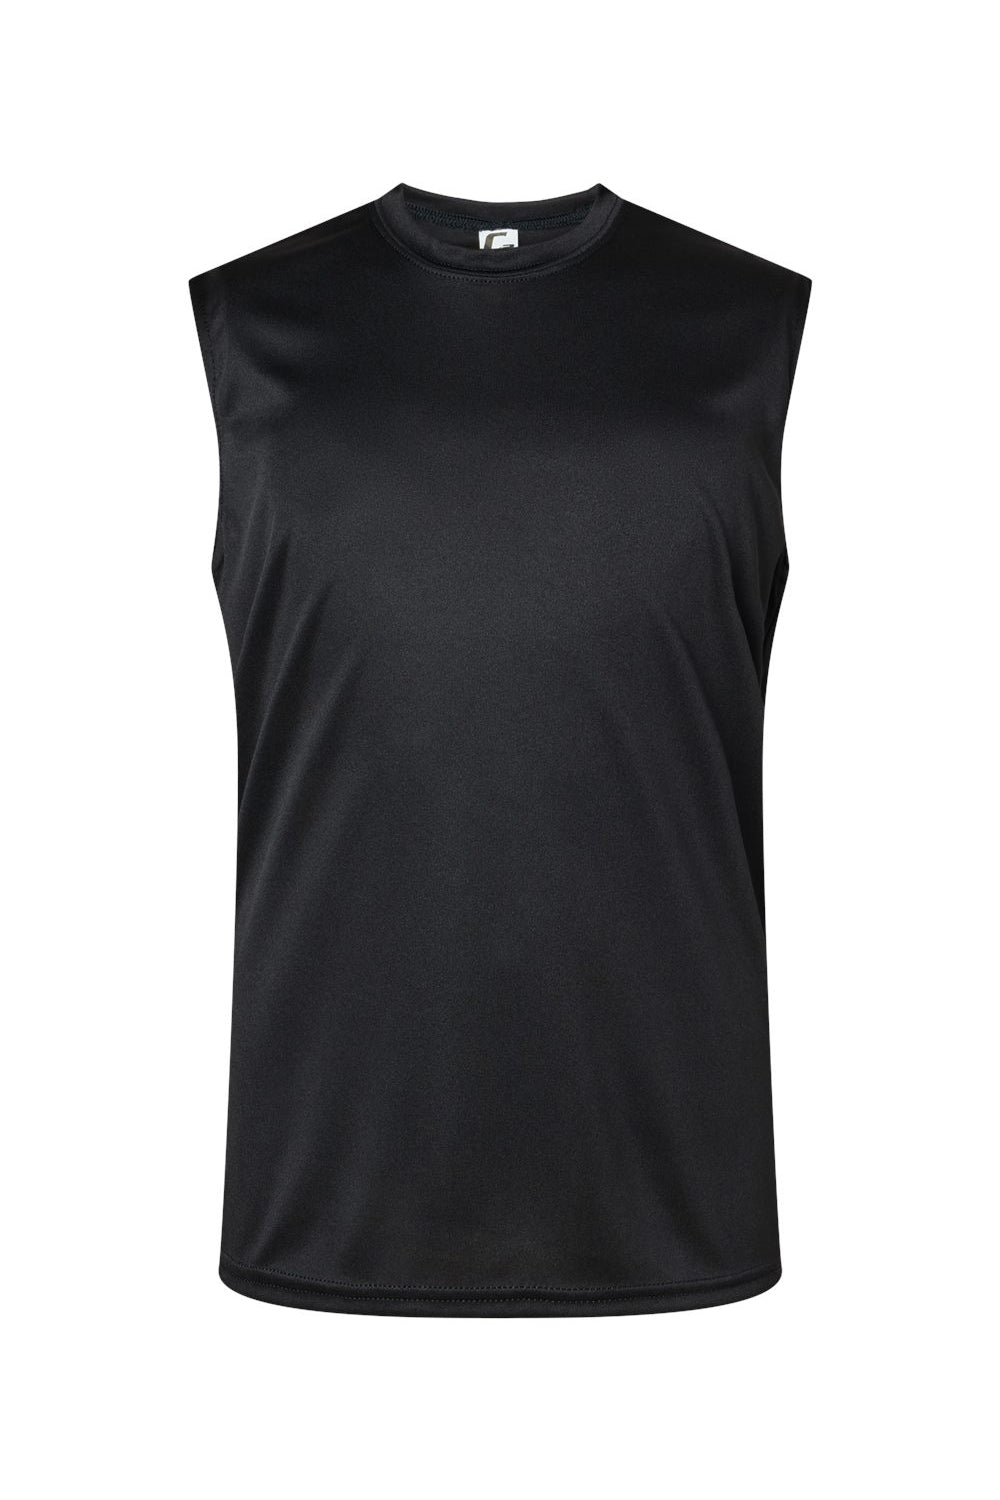 C2 Sport 5230 Youth Moisture Wicking Tank Top Black Flat Front